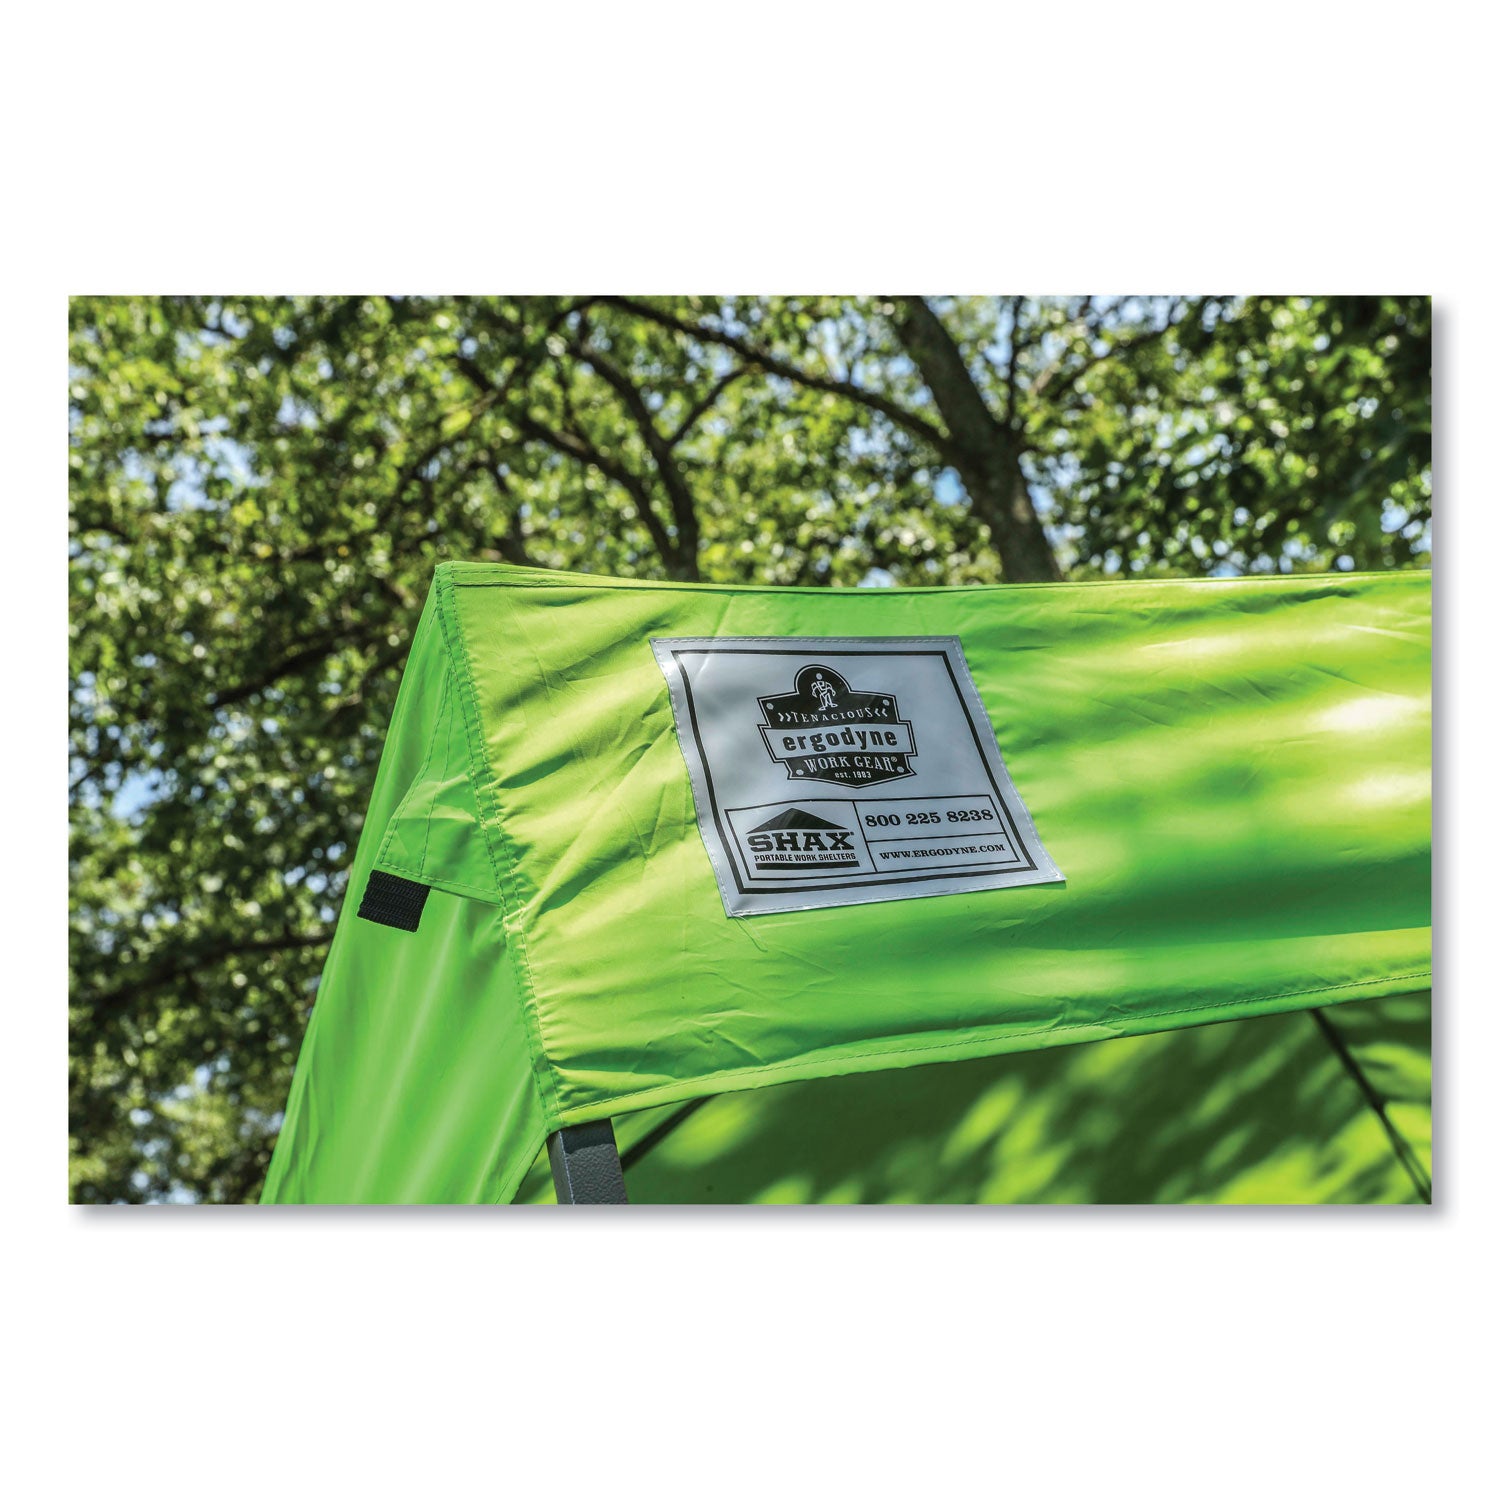 shax-6010c-replacement-pop-up-tent-canopy-for-6010-10-ft-x-10-ft-polyester-lime-ships-in-1-3-business-days_ego12911 - 2